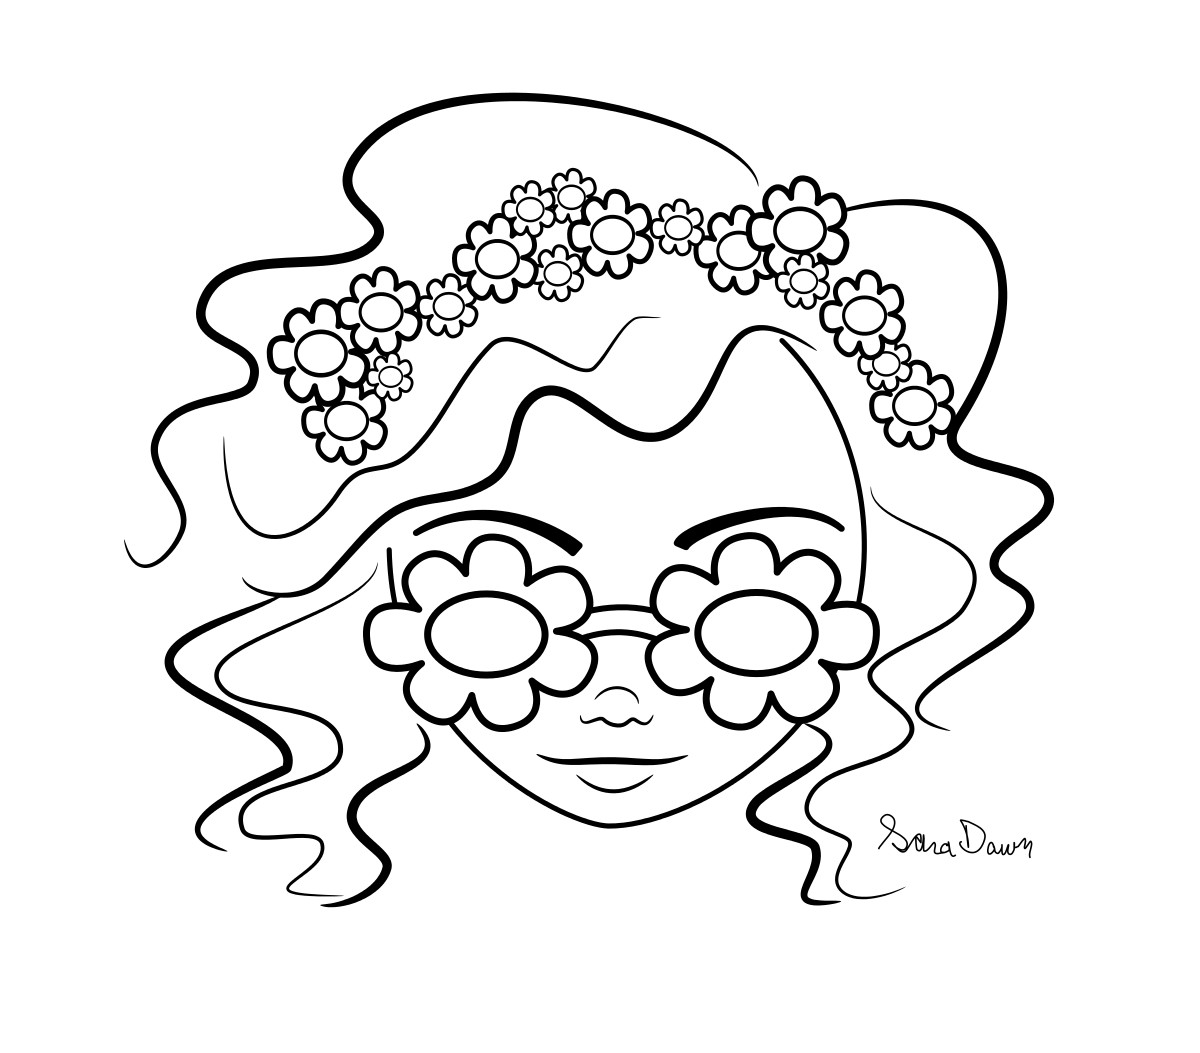 May Flowers Coloring Pages
 Coloring pages for may flowers